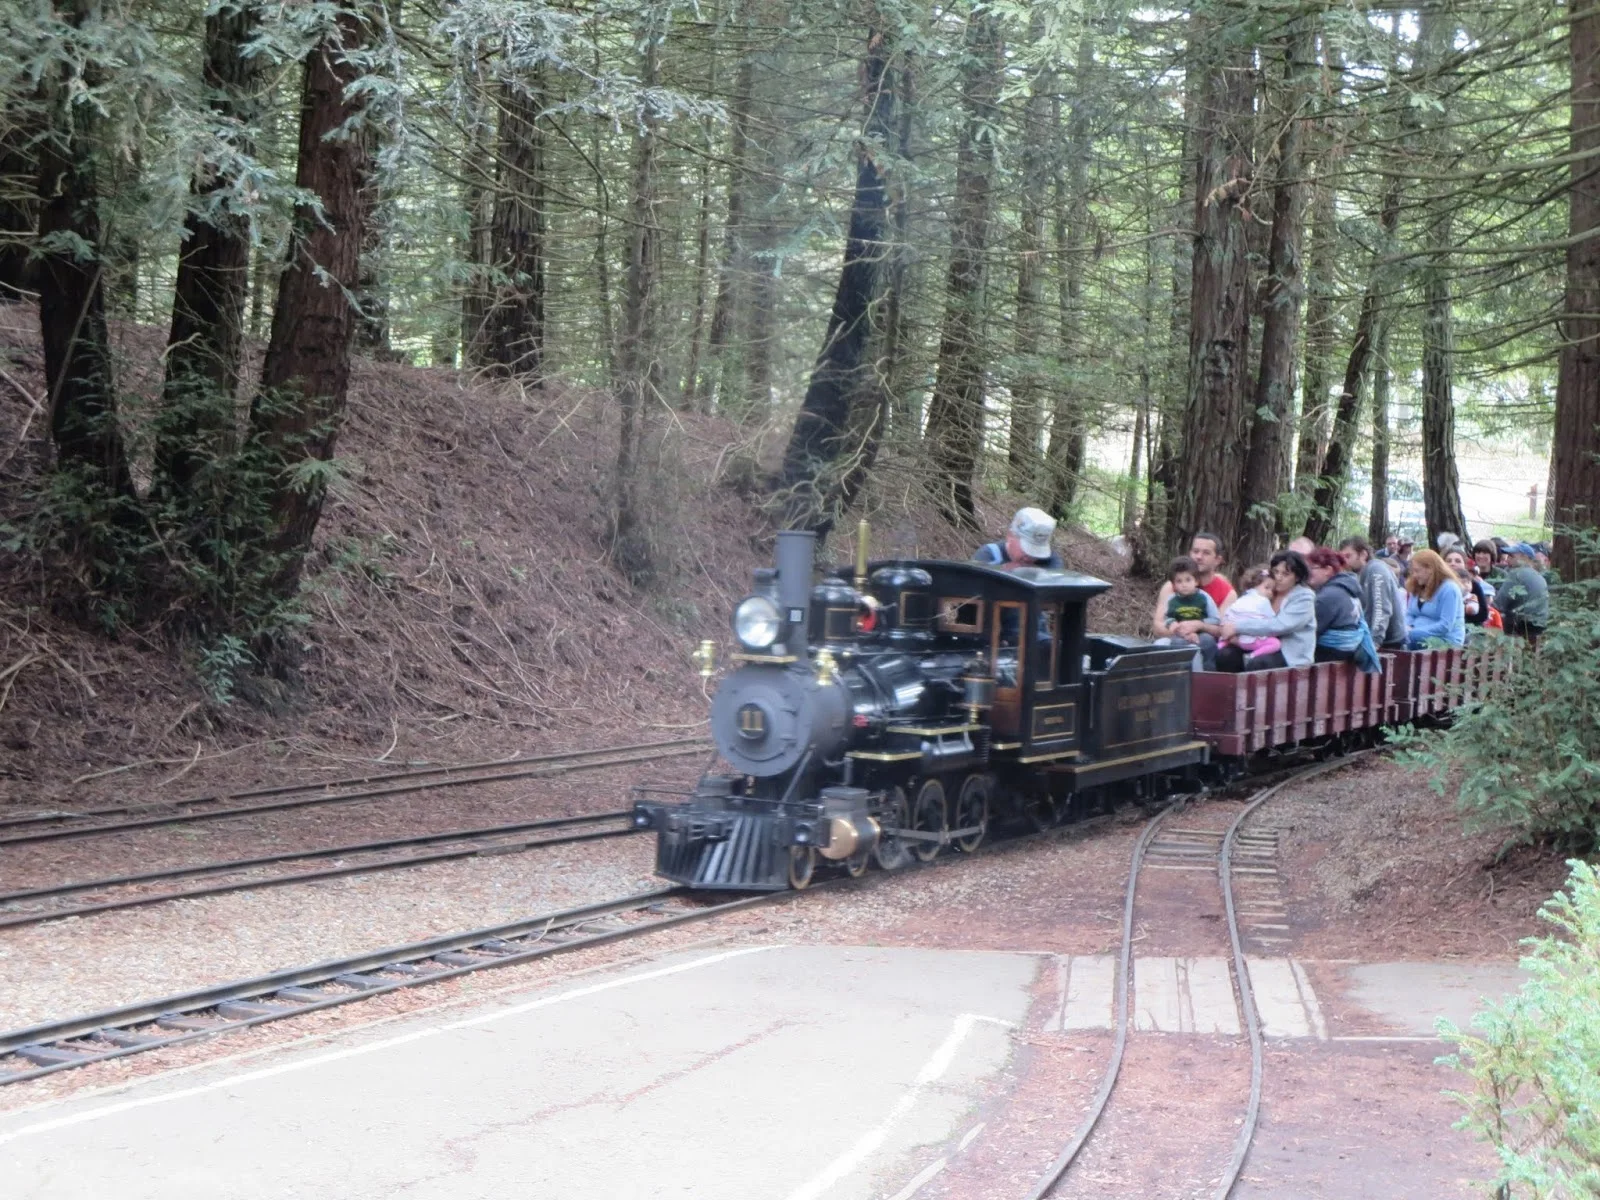 Things to do in the San Francisco Bay Area: Tilden Regional Park railway